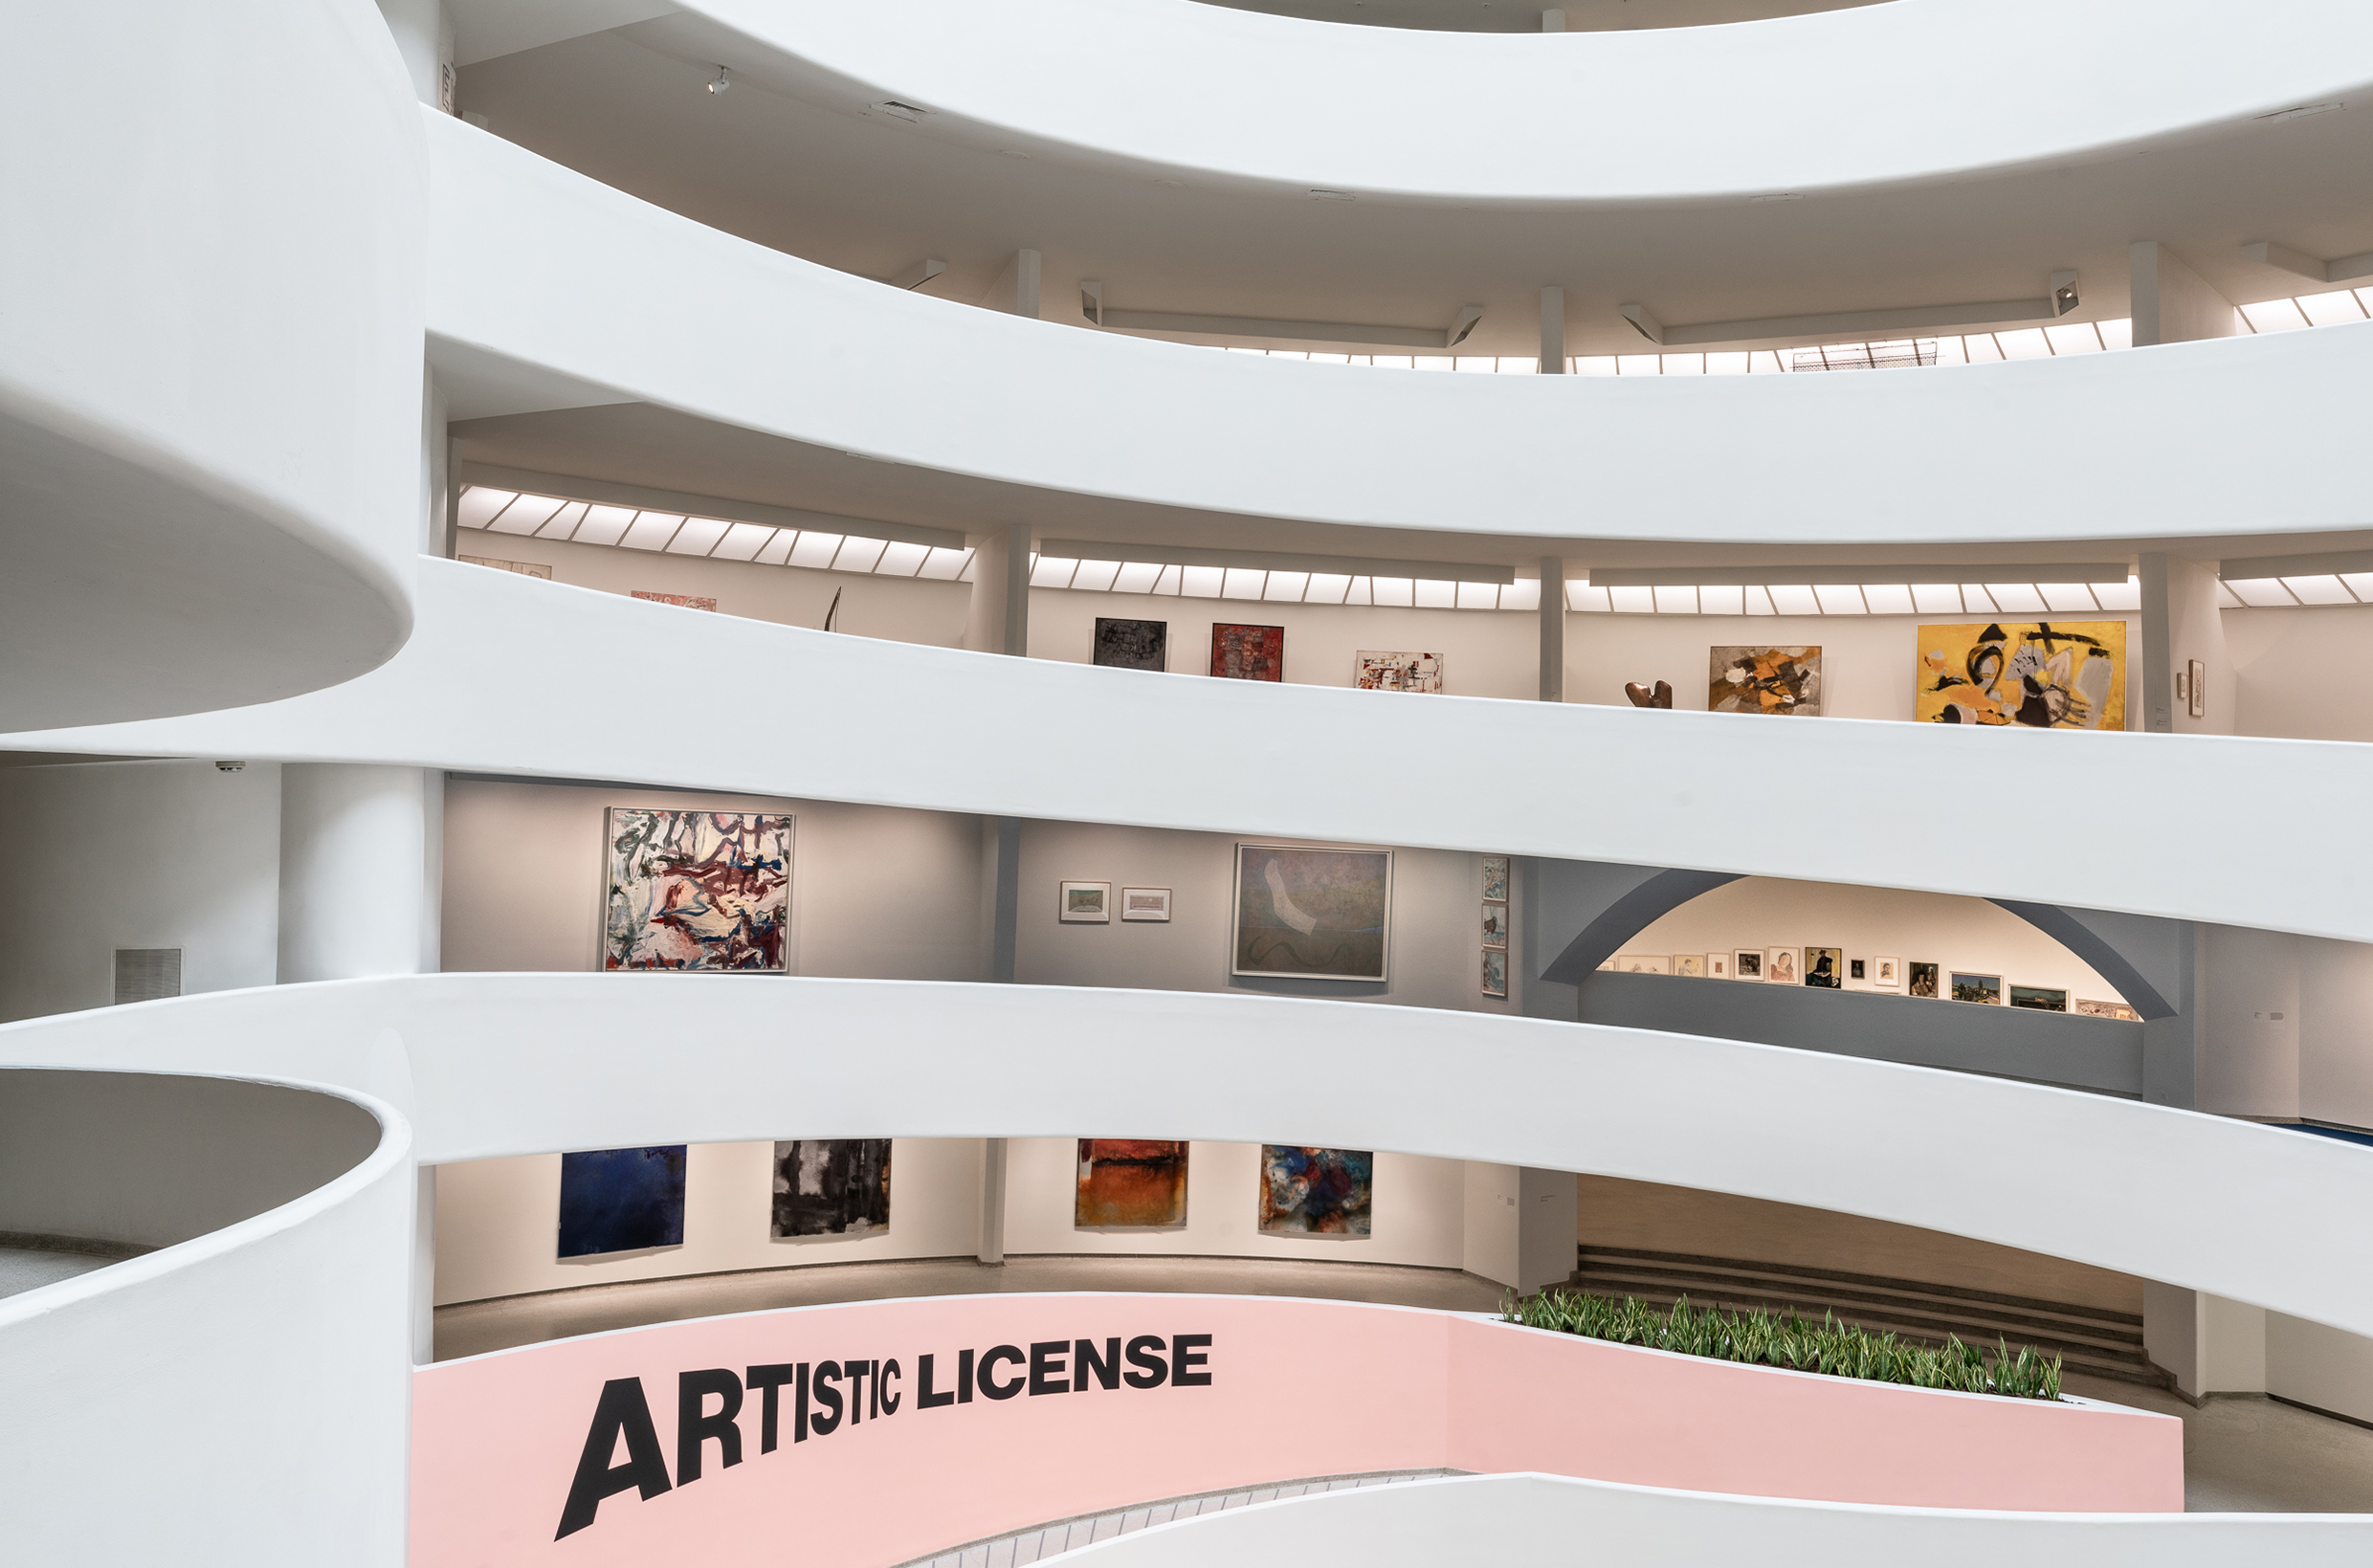 Guggenheim Presents First ArtistCurated Exhibition, Artistic License